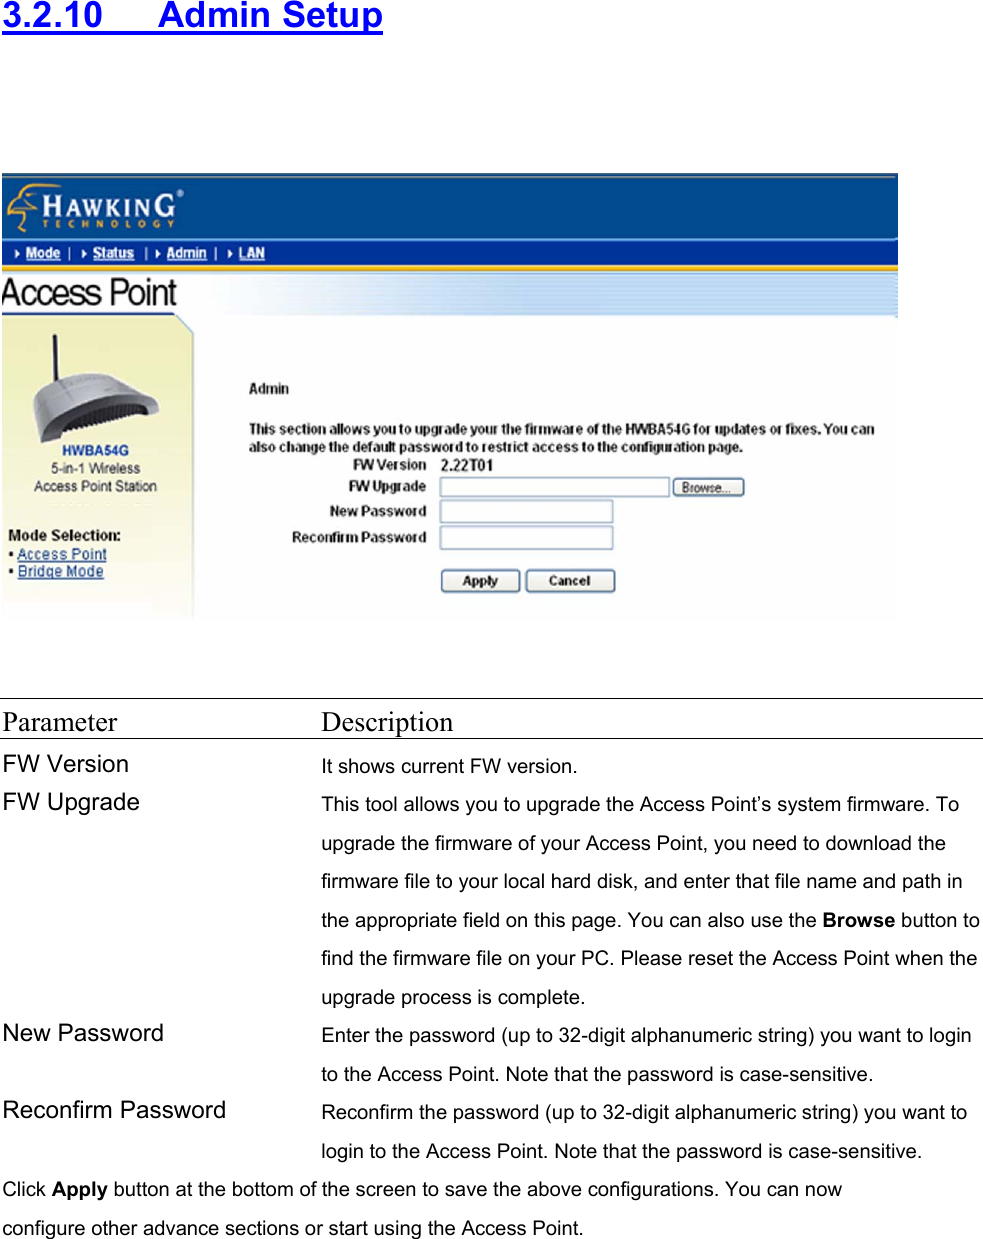 3.2.10   Admin Setup     Parameter Description FW Version It shows current FW version. FW Upgrade  This tool allows you to upgrade the Access Point’s system firmware. To upgrade the firmware of your Access Point, you need to download the firmware file to your local hard disk, and enter that file name and path in the appropriate field on this page. You can also use the Browse button to find the firmware file on your PC. Please reset the Access Point when the upgrade process is complete. New Password  Enter the password (up to 32-digit alphanumeric string) you want to login to the Access Point. Note that the password is case-sensitive. Reconfirm Password  Reconfirm the password (up to 32-digit alphanumeric string) you want to login to the Access Point. Note that the password is case-sensitive. Click Apply button at the bottom of the screen to save the above configurations. You can now configure other advance sections or start using the Access Point.  